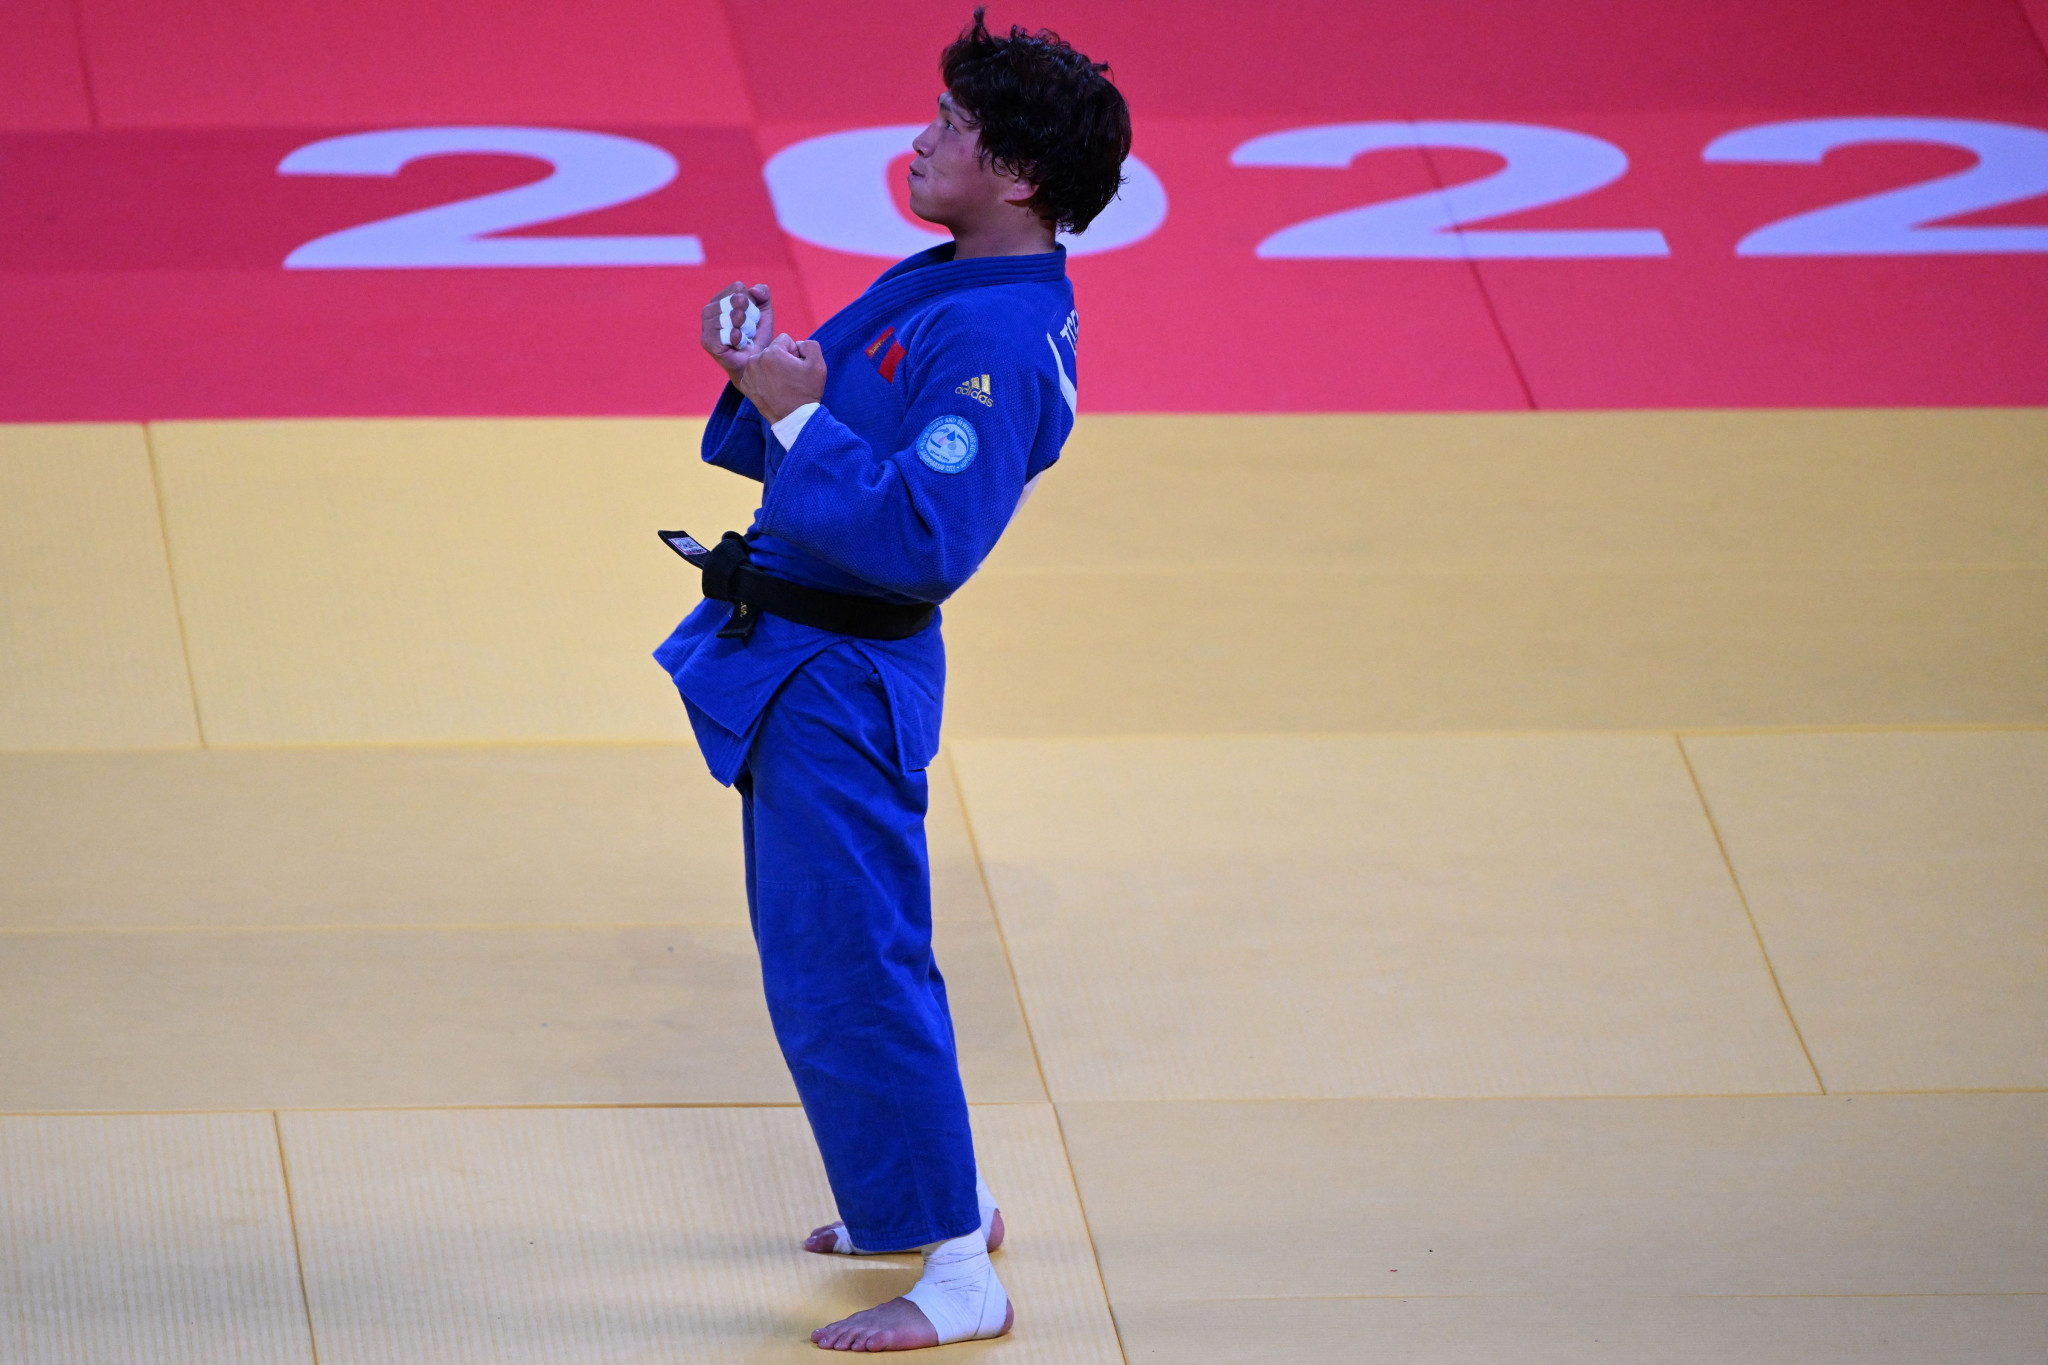 Japan's gold medal streak was stopped today at the Judo World Championships ©Getty Images